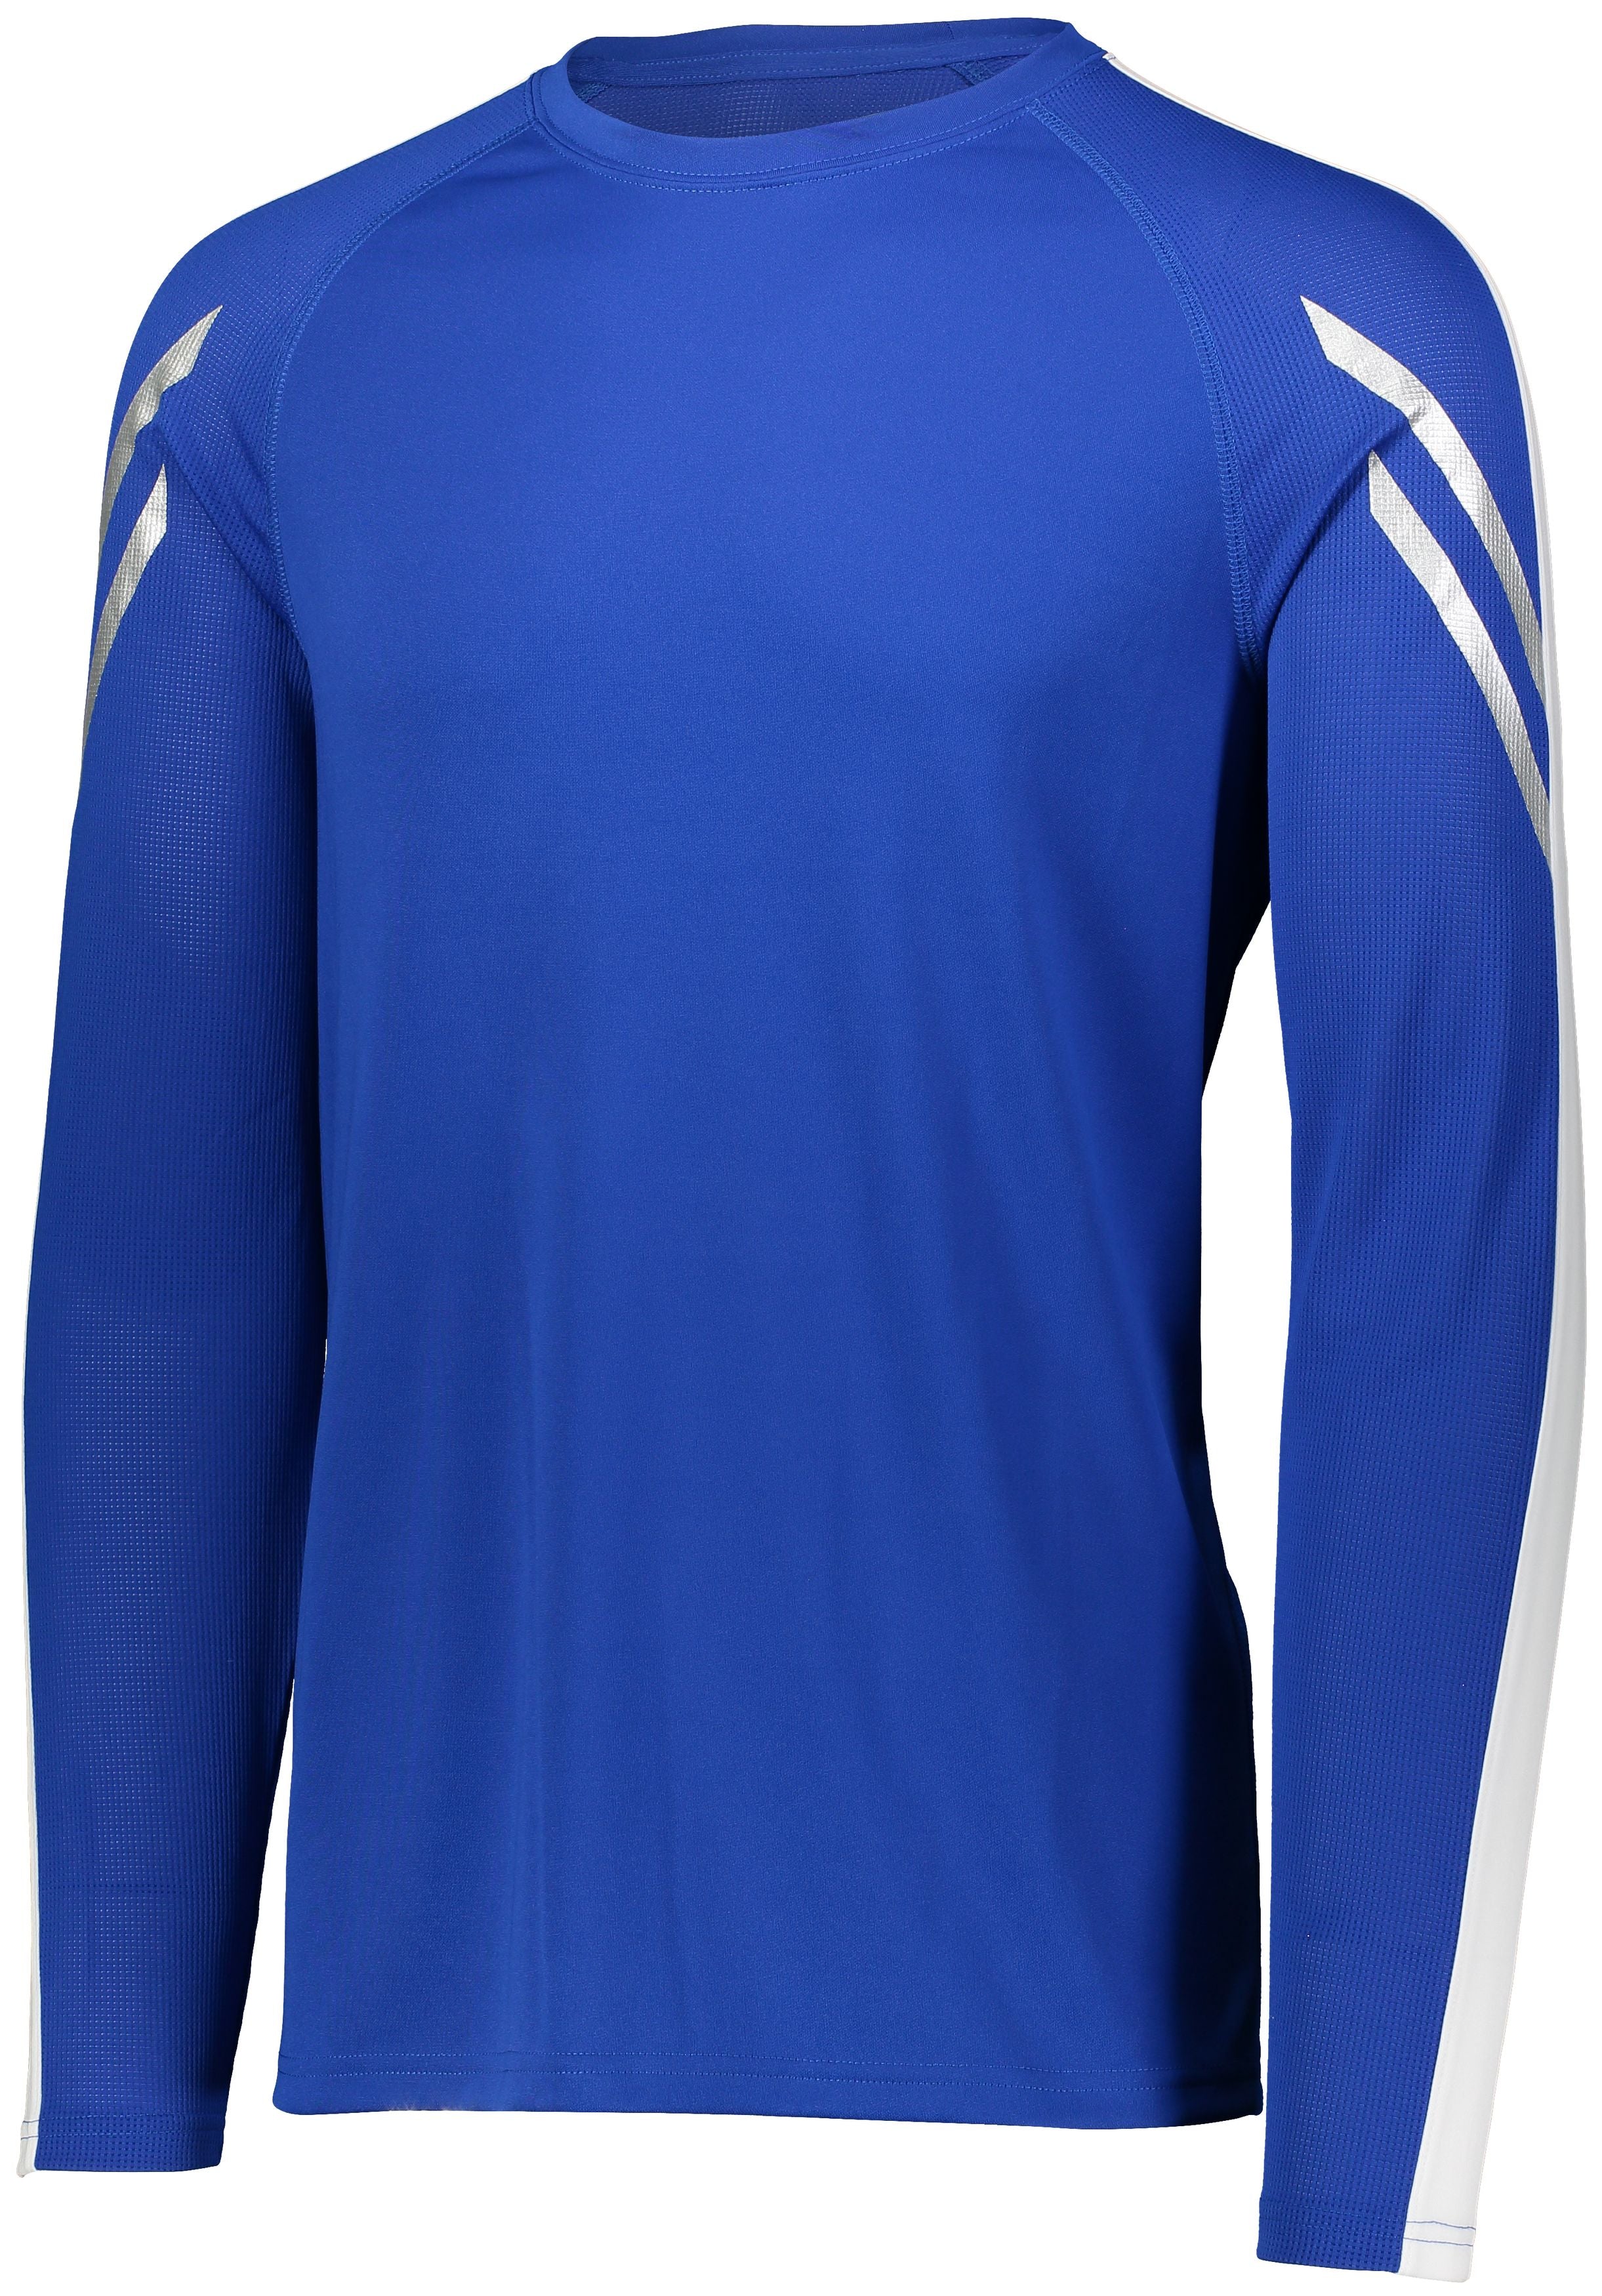 Holloway Flux Shirt Long Sleeve in Royal/White  -Part of the Adult, Holloway, Shirts, Flux-Collection product lines at KanaleyCreations.com